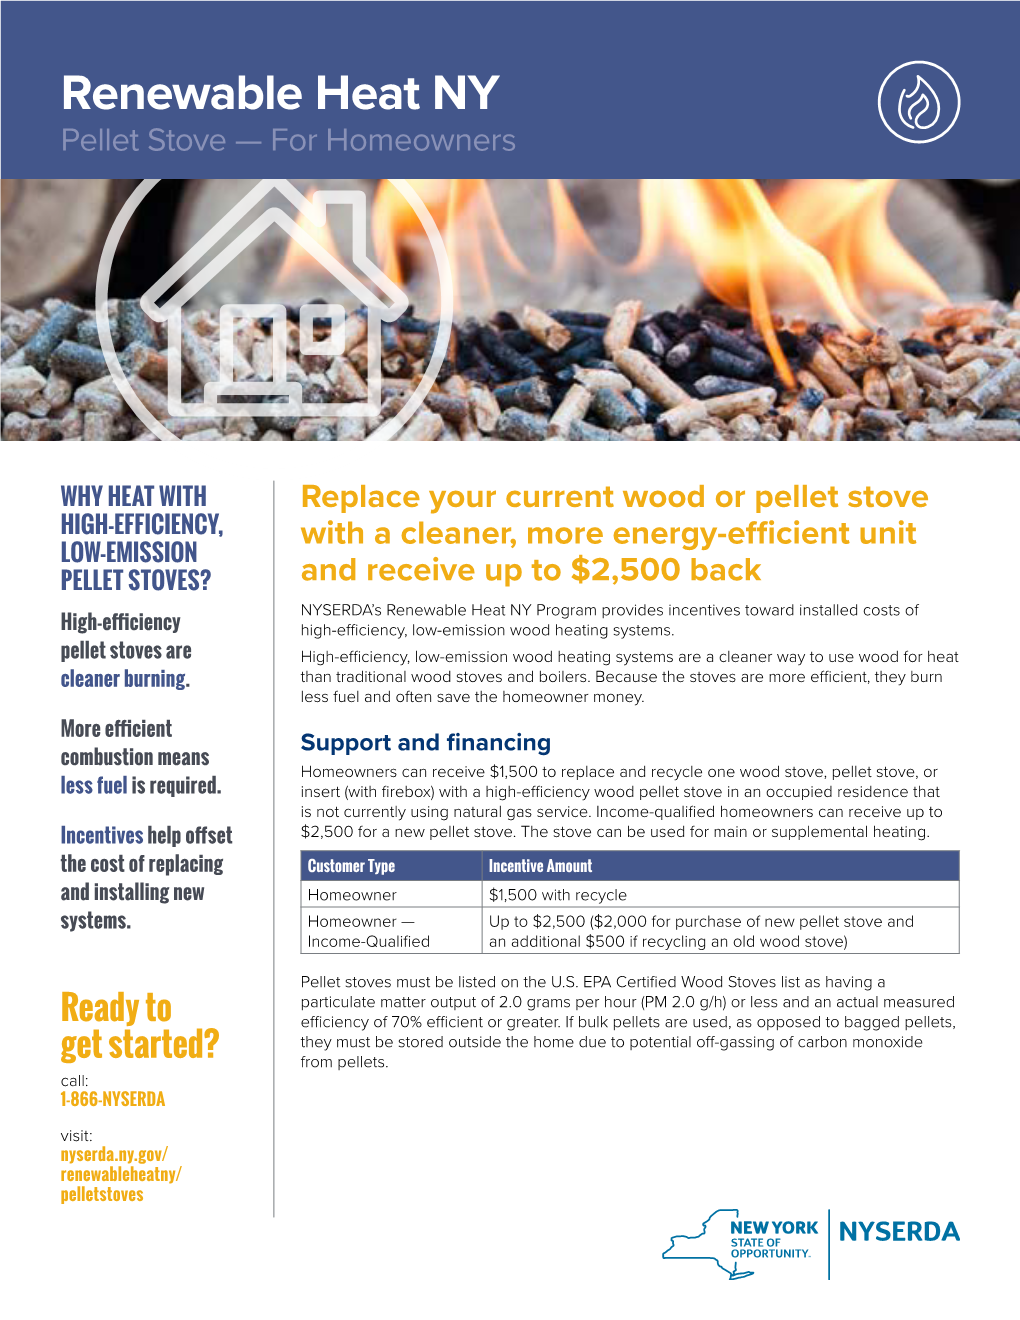 Renewable Heat NY: Pellet Stoves for Homeowners